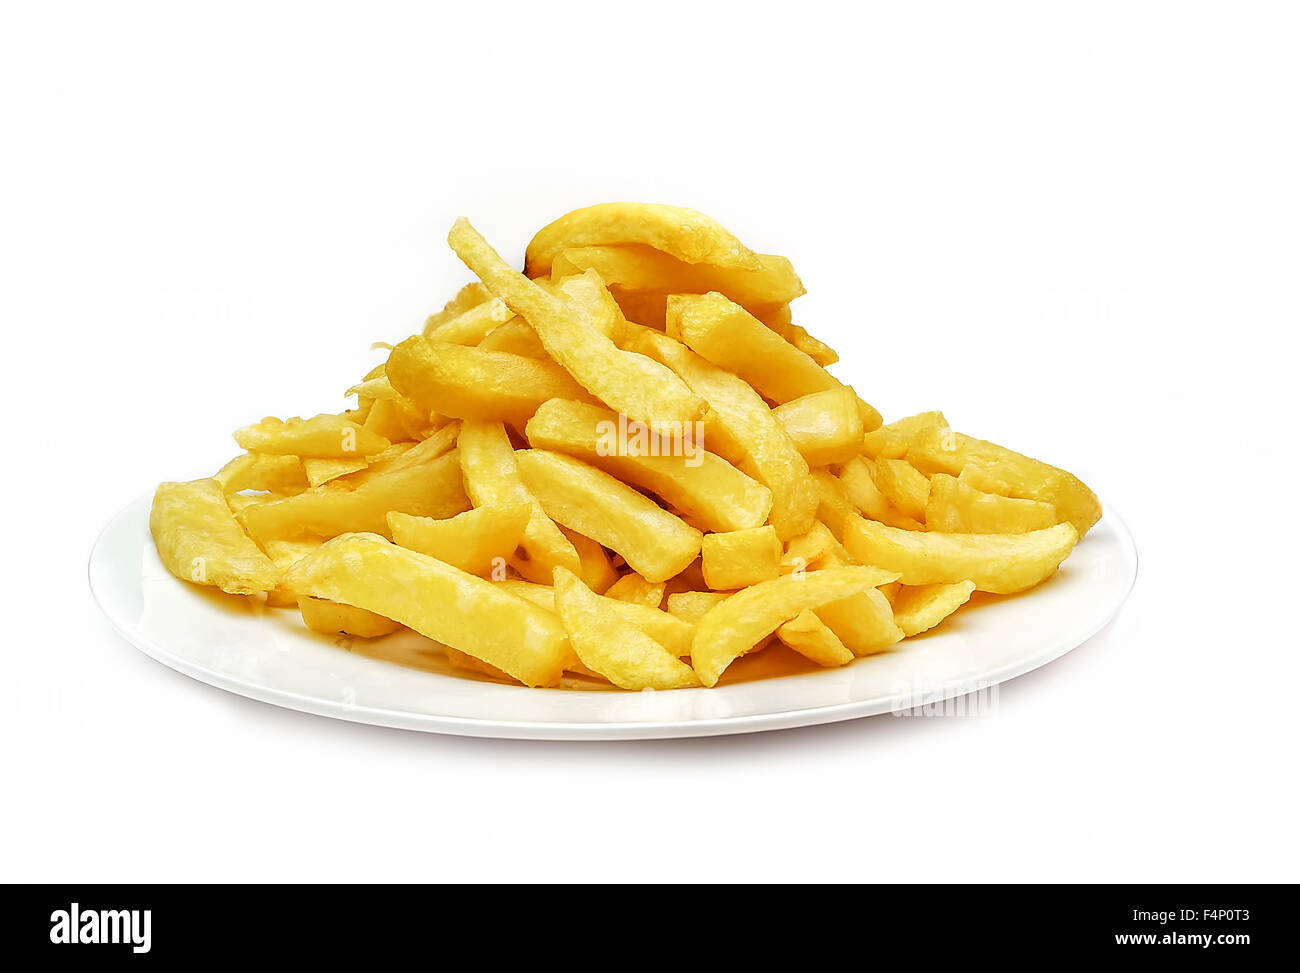 Fish and chips on plate Imágenes recortadas de stock - Alamy